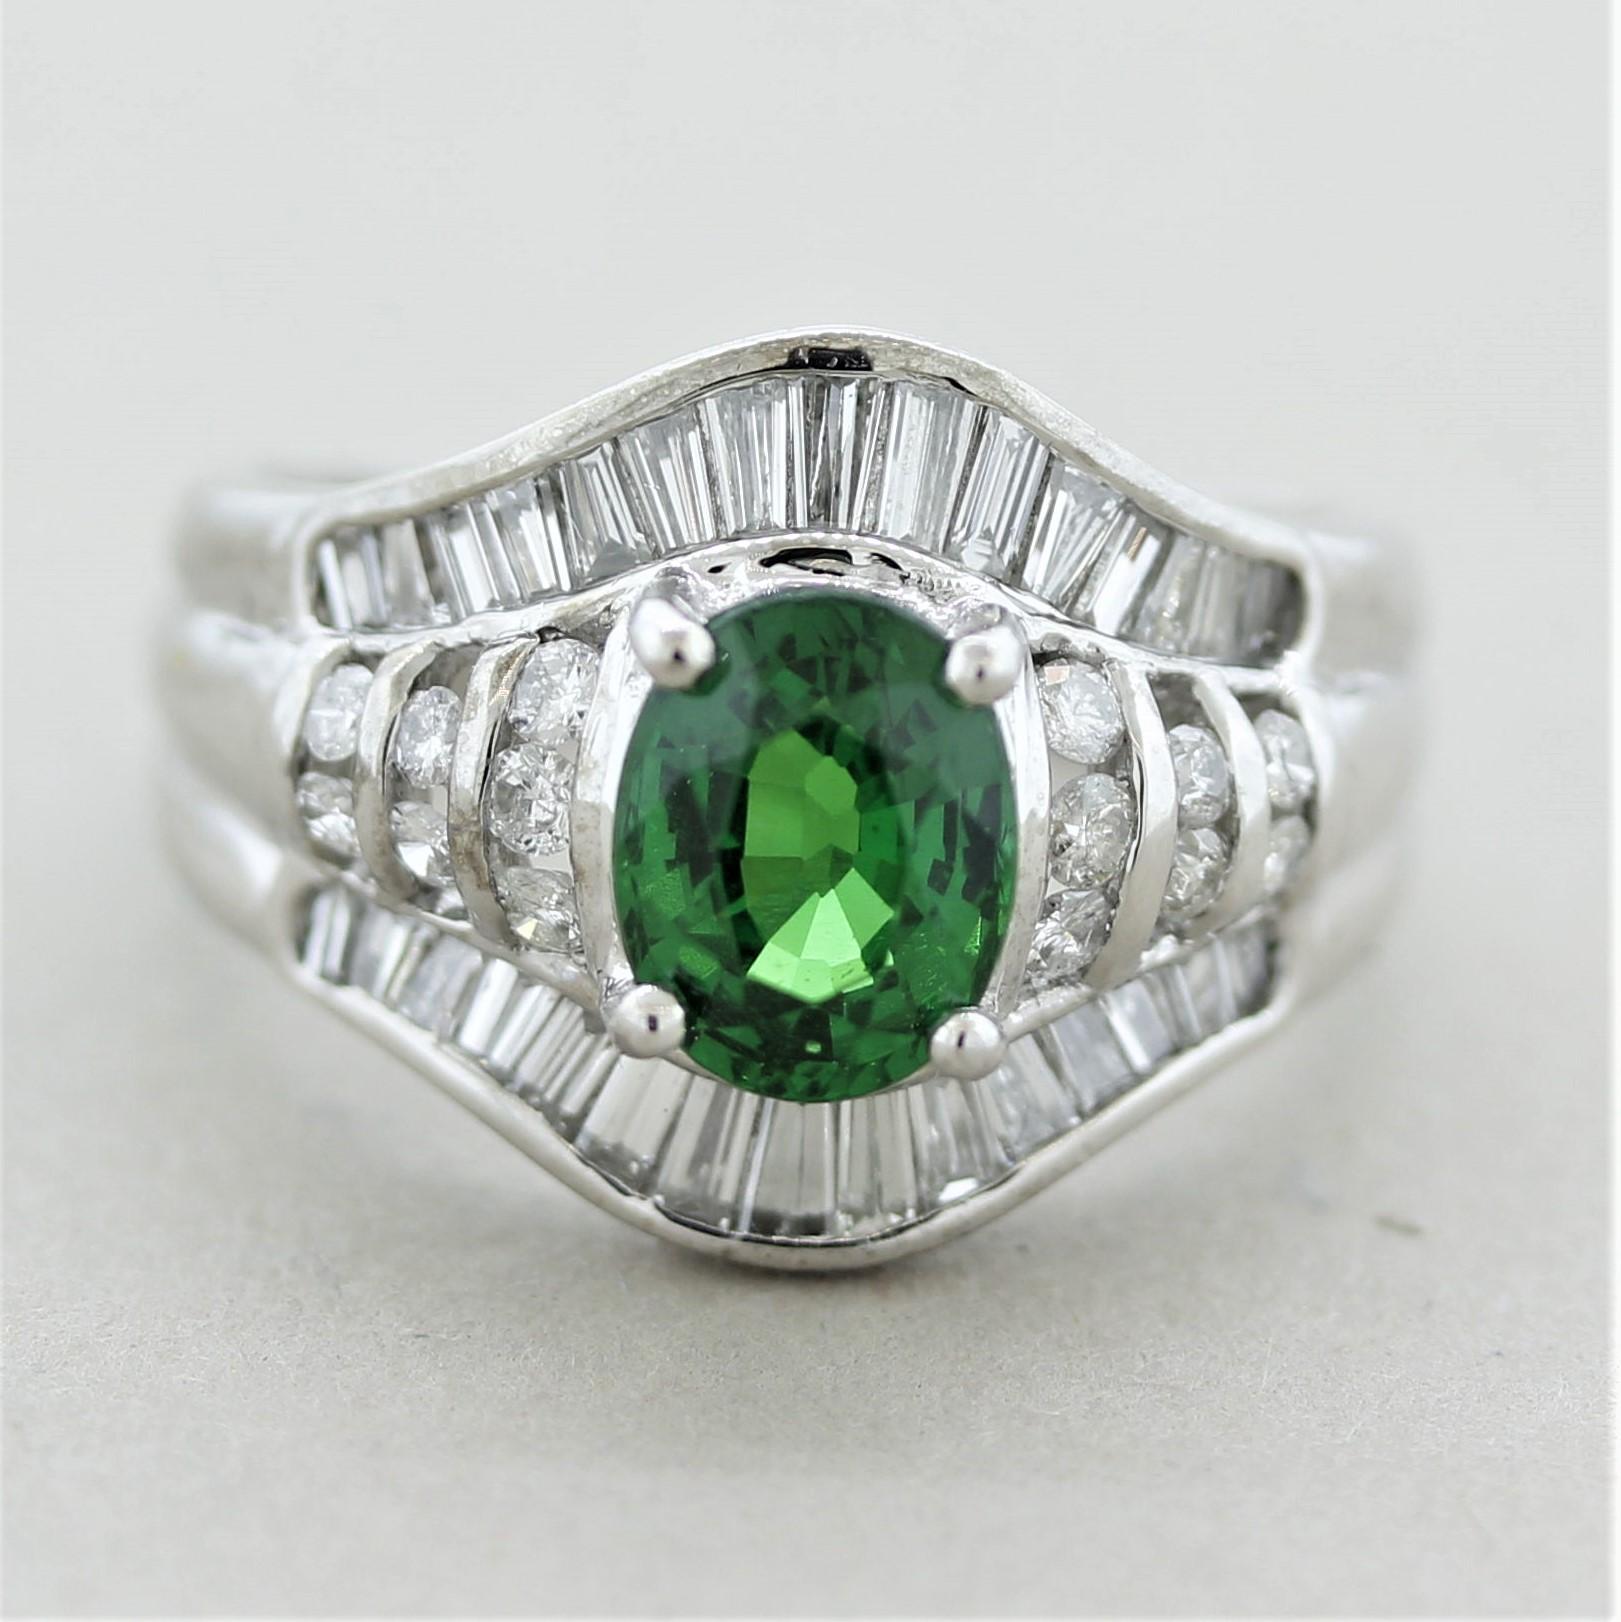 A lovely ring featuring a beautiful and fine quality tsavorite garnet. It weighs 1.50 carats and has a bright intense green color seen in top stones. It is accented by 0.90 carats of baguette and round brilliant-cut diamonds set around garnet in a